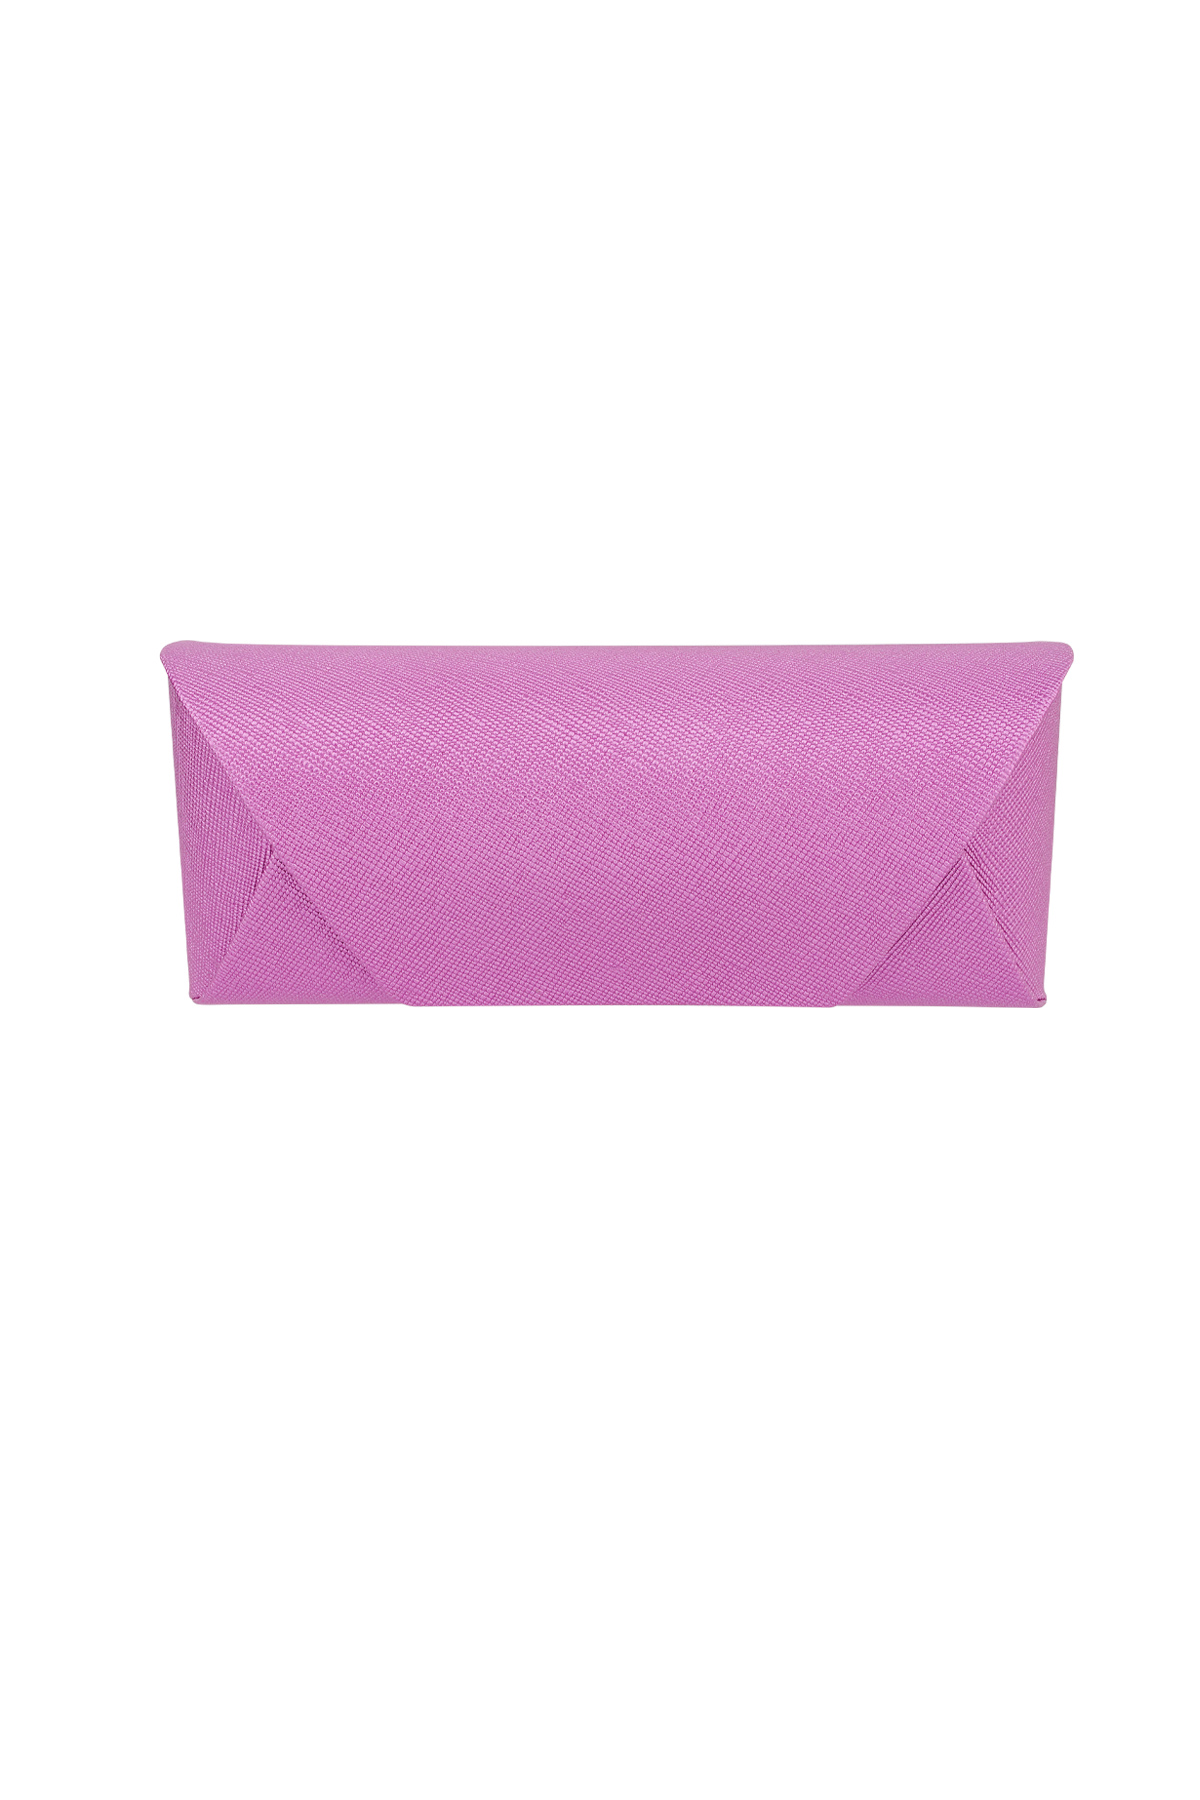 Colorful sunglasses case - pink